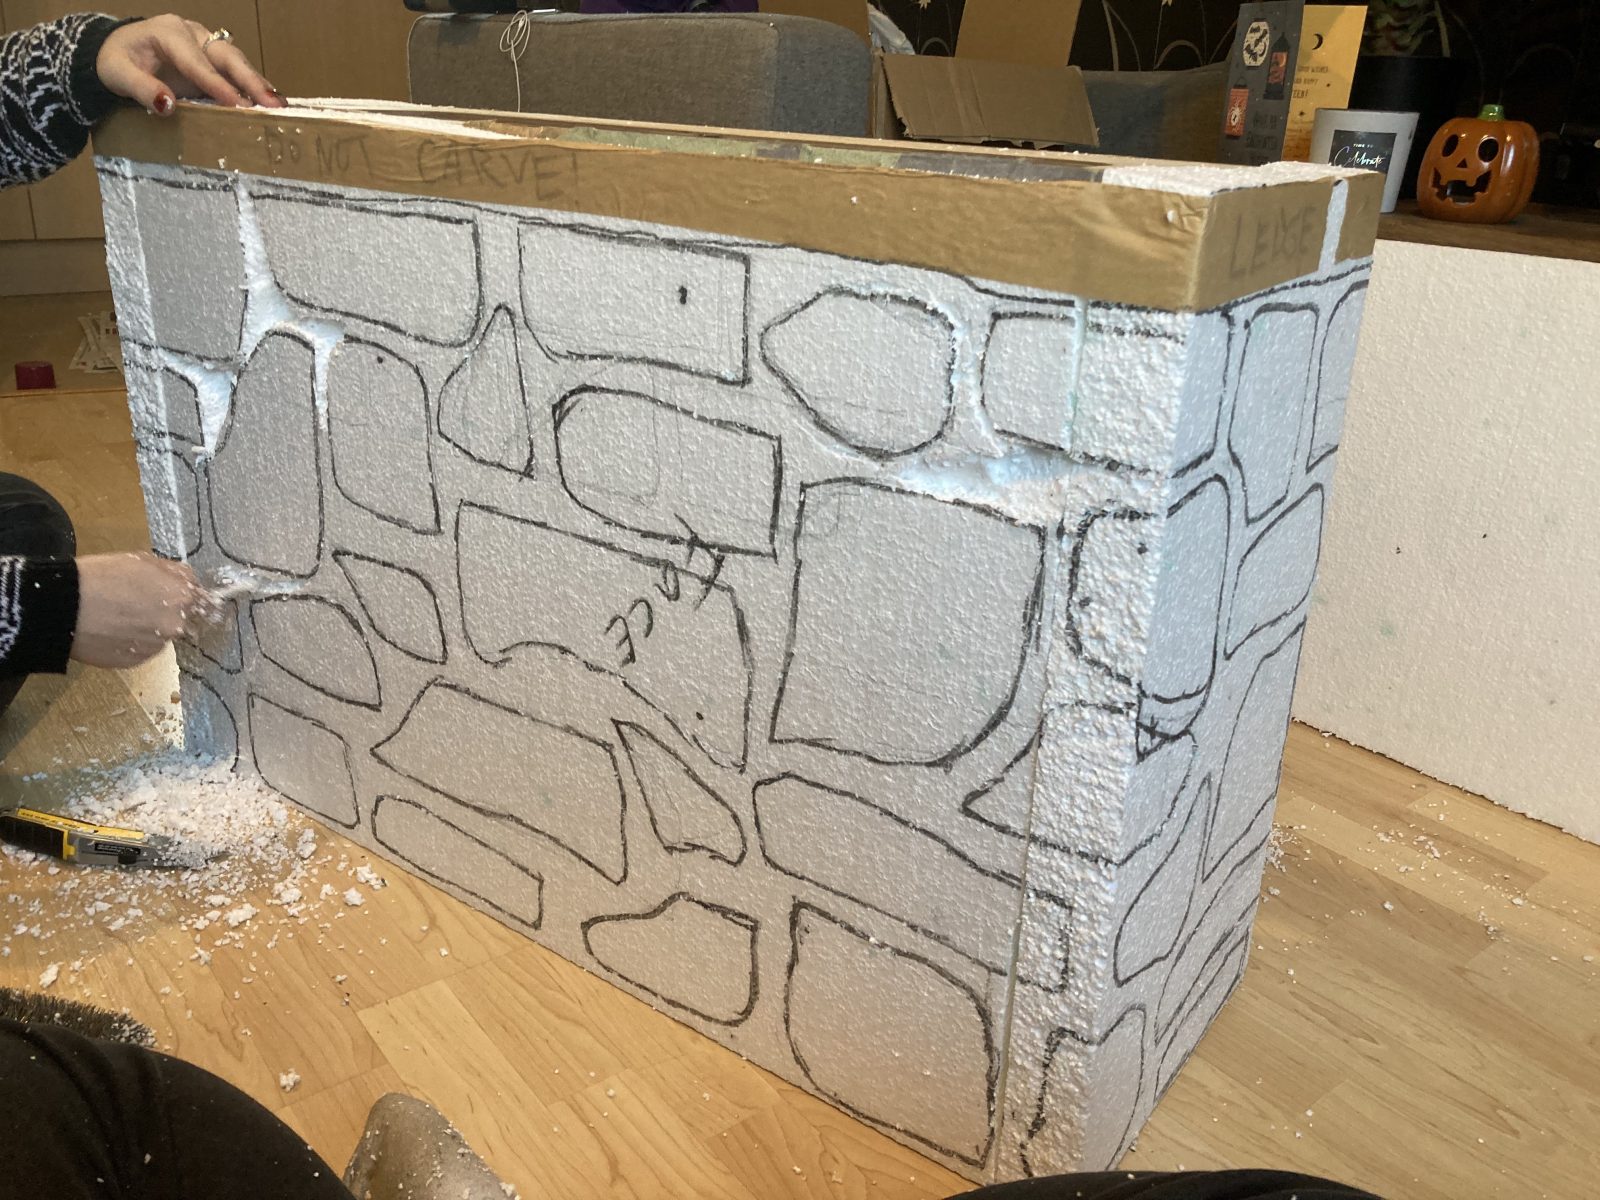 The Hounds of Baskerville - Process photo of the window sill wall, we covered this wooden box in thick polystyrene so we could carve out stones to create a stone wall